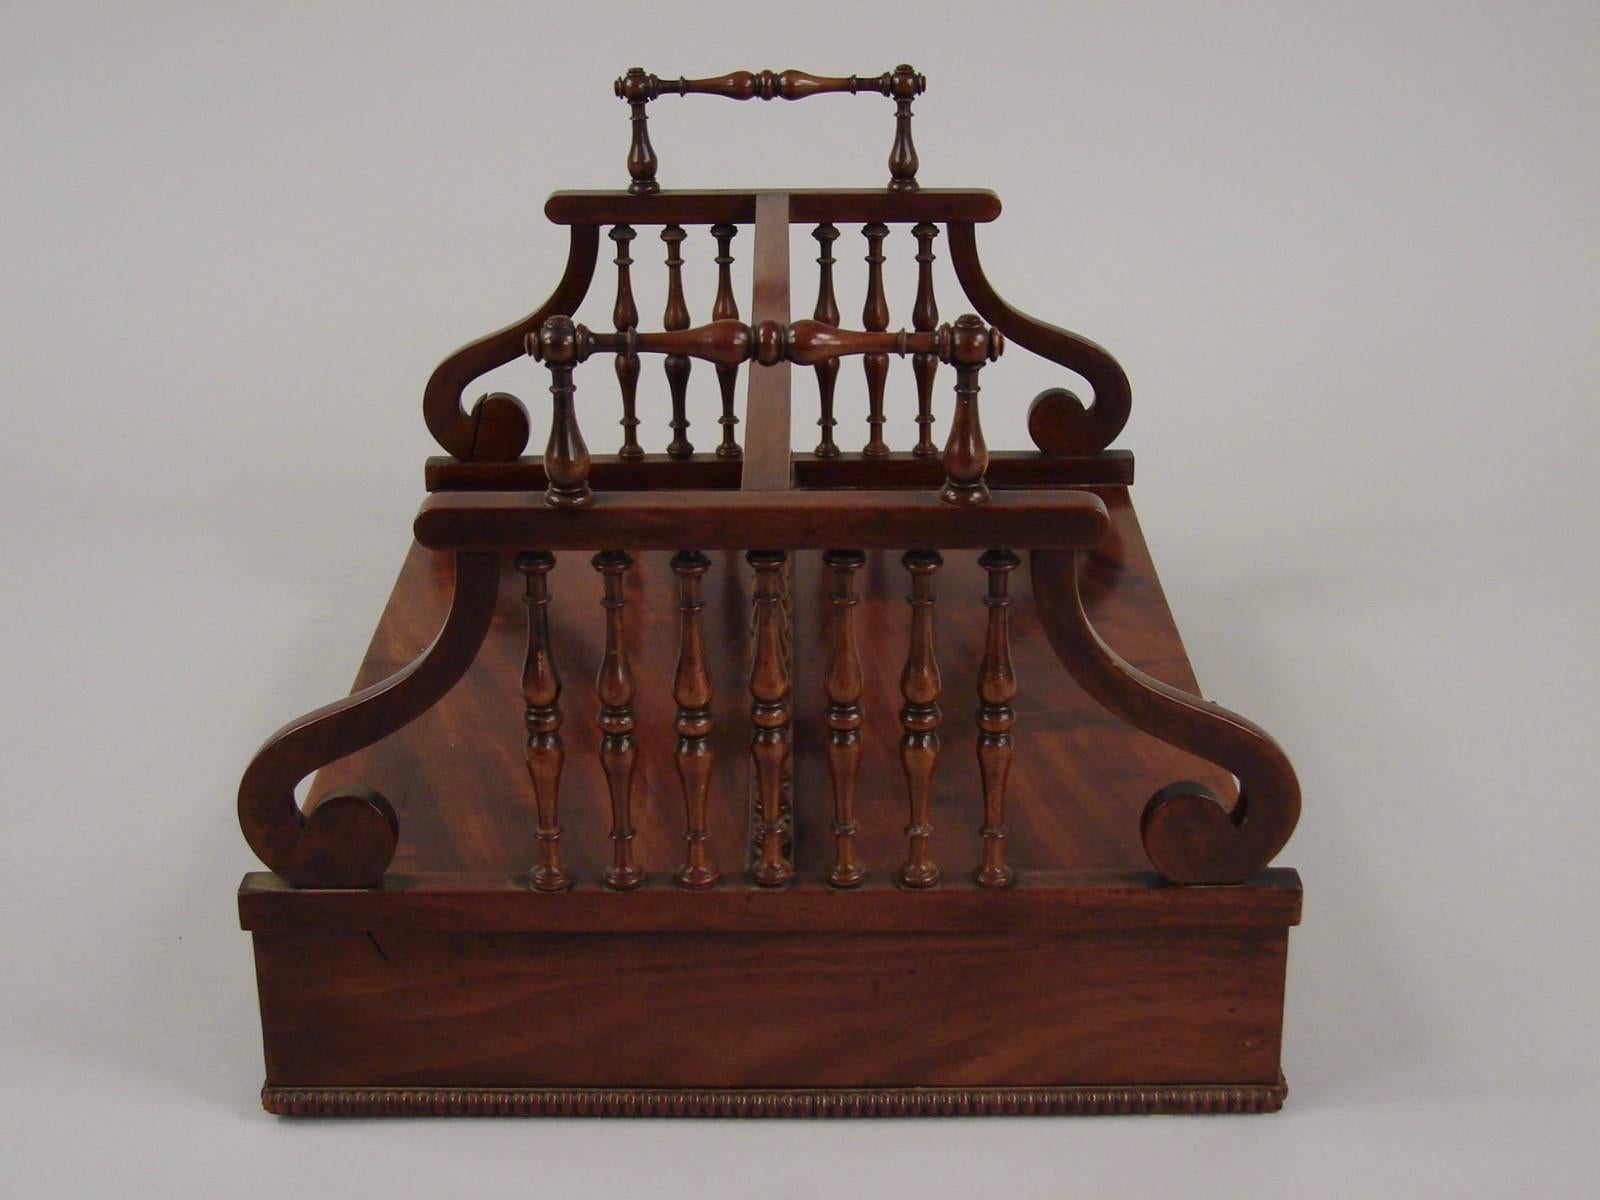 An English late Regency period goncalo alves book carrier, the top with a gallery and carry handles above a single drawer, circa 1835.